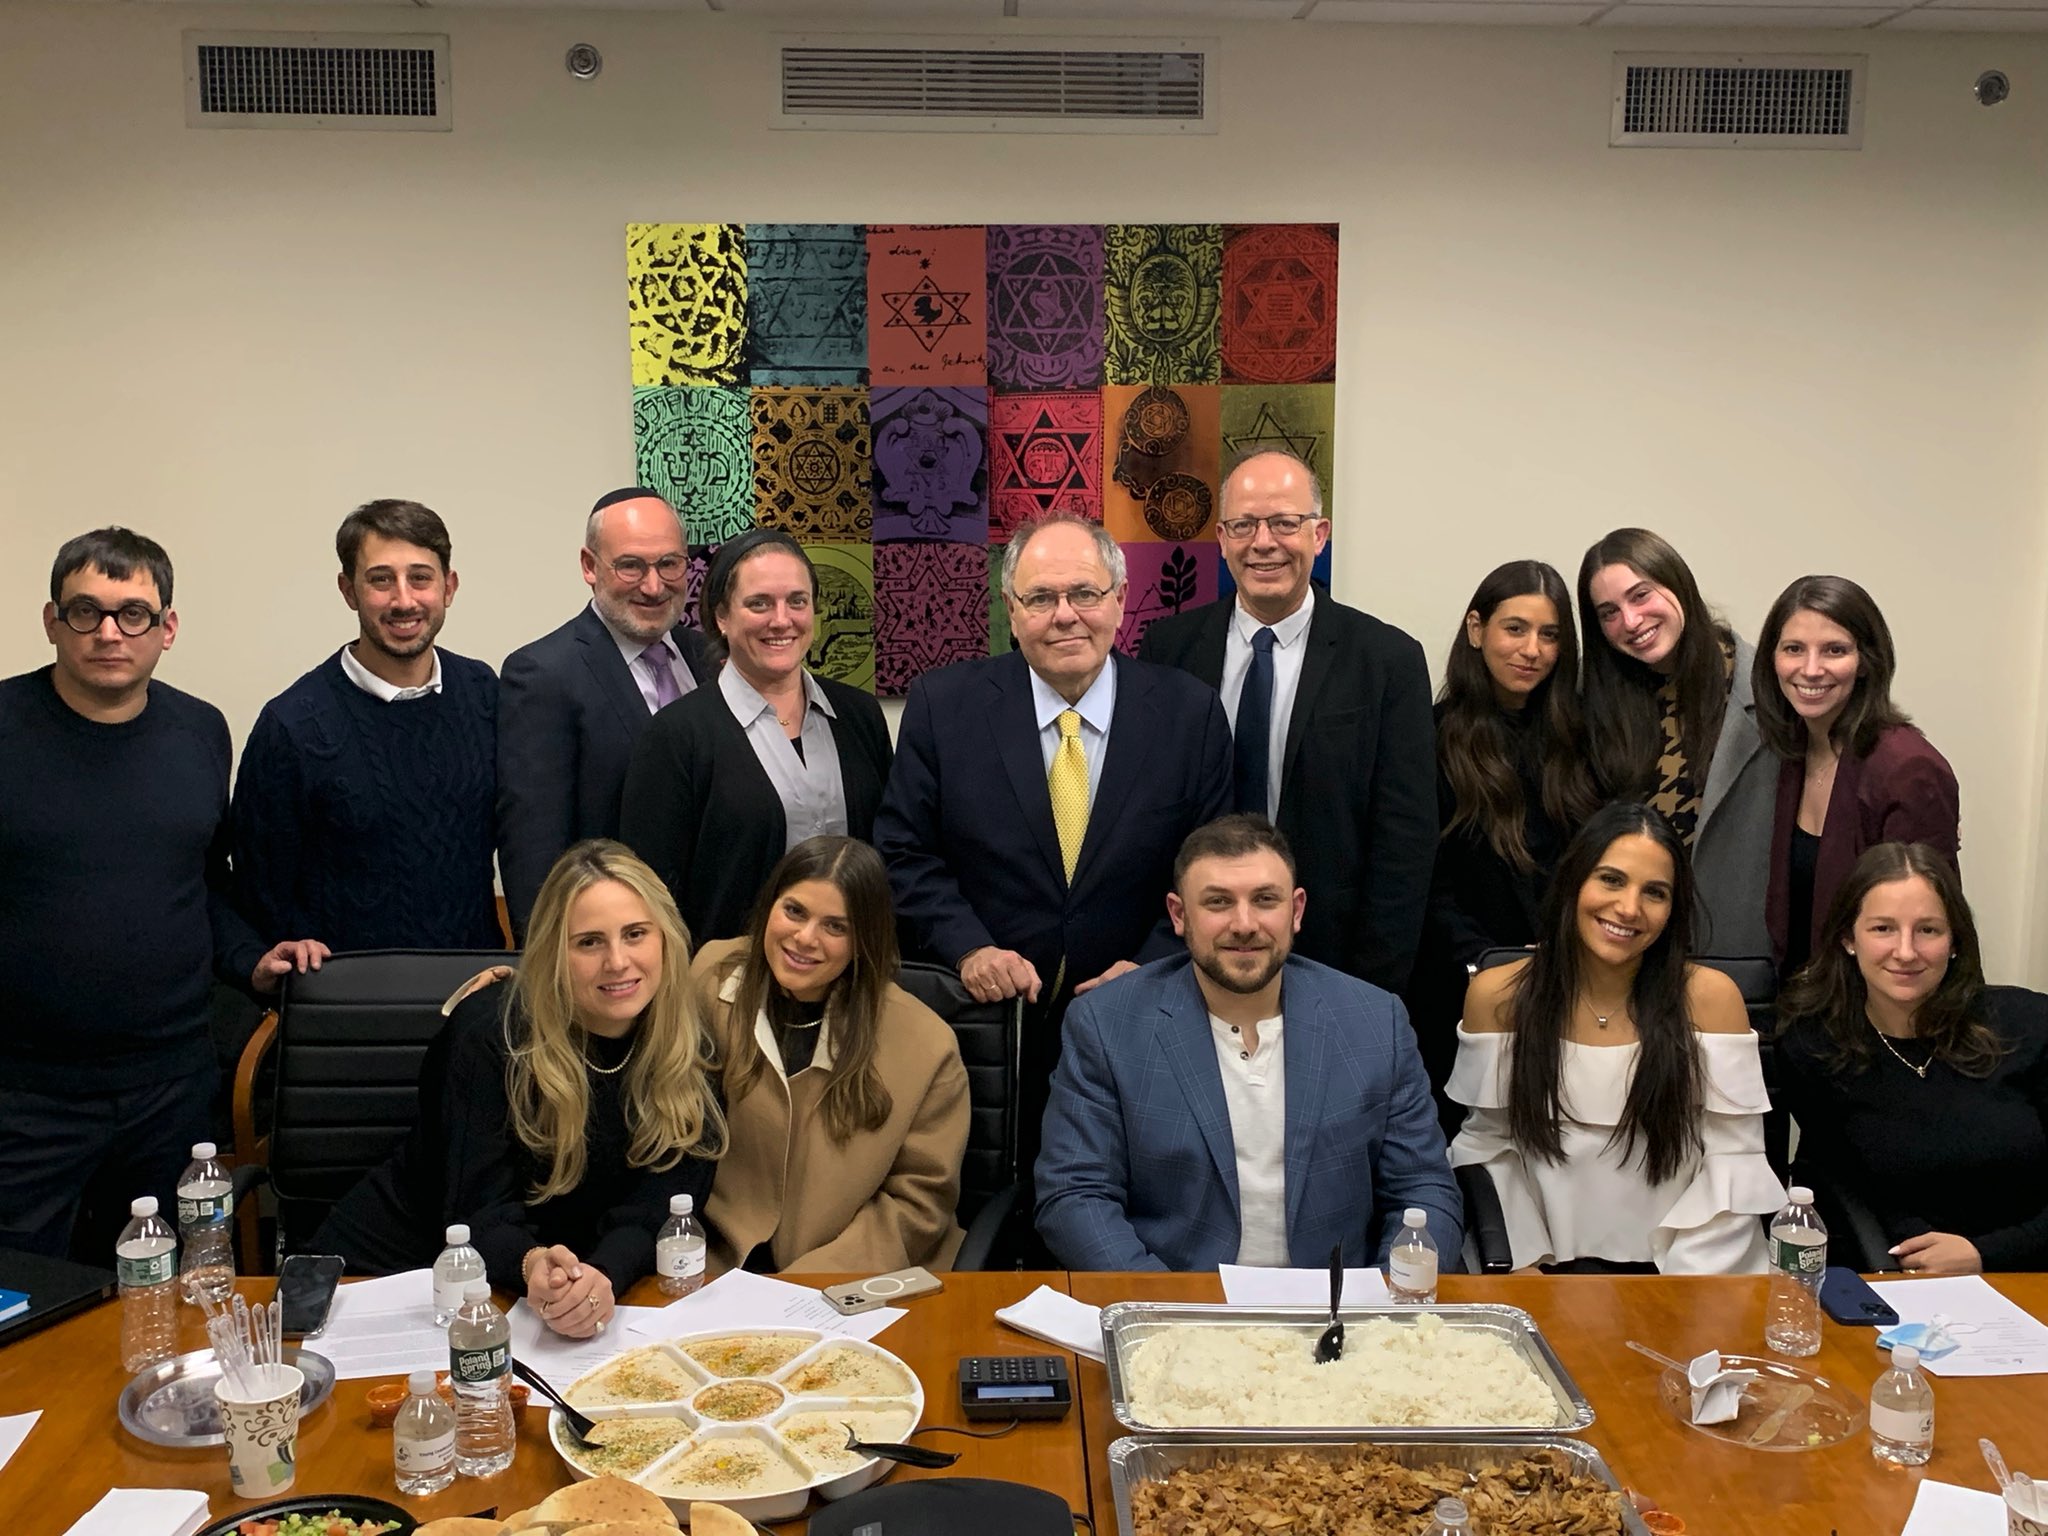 Dani Dayan with members of the Young Leadership Association of the American Society for Yad Vashem